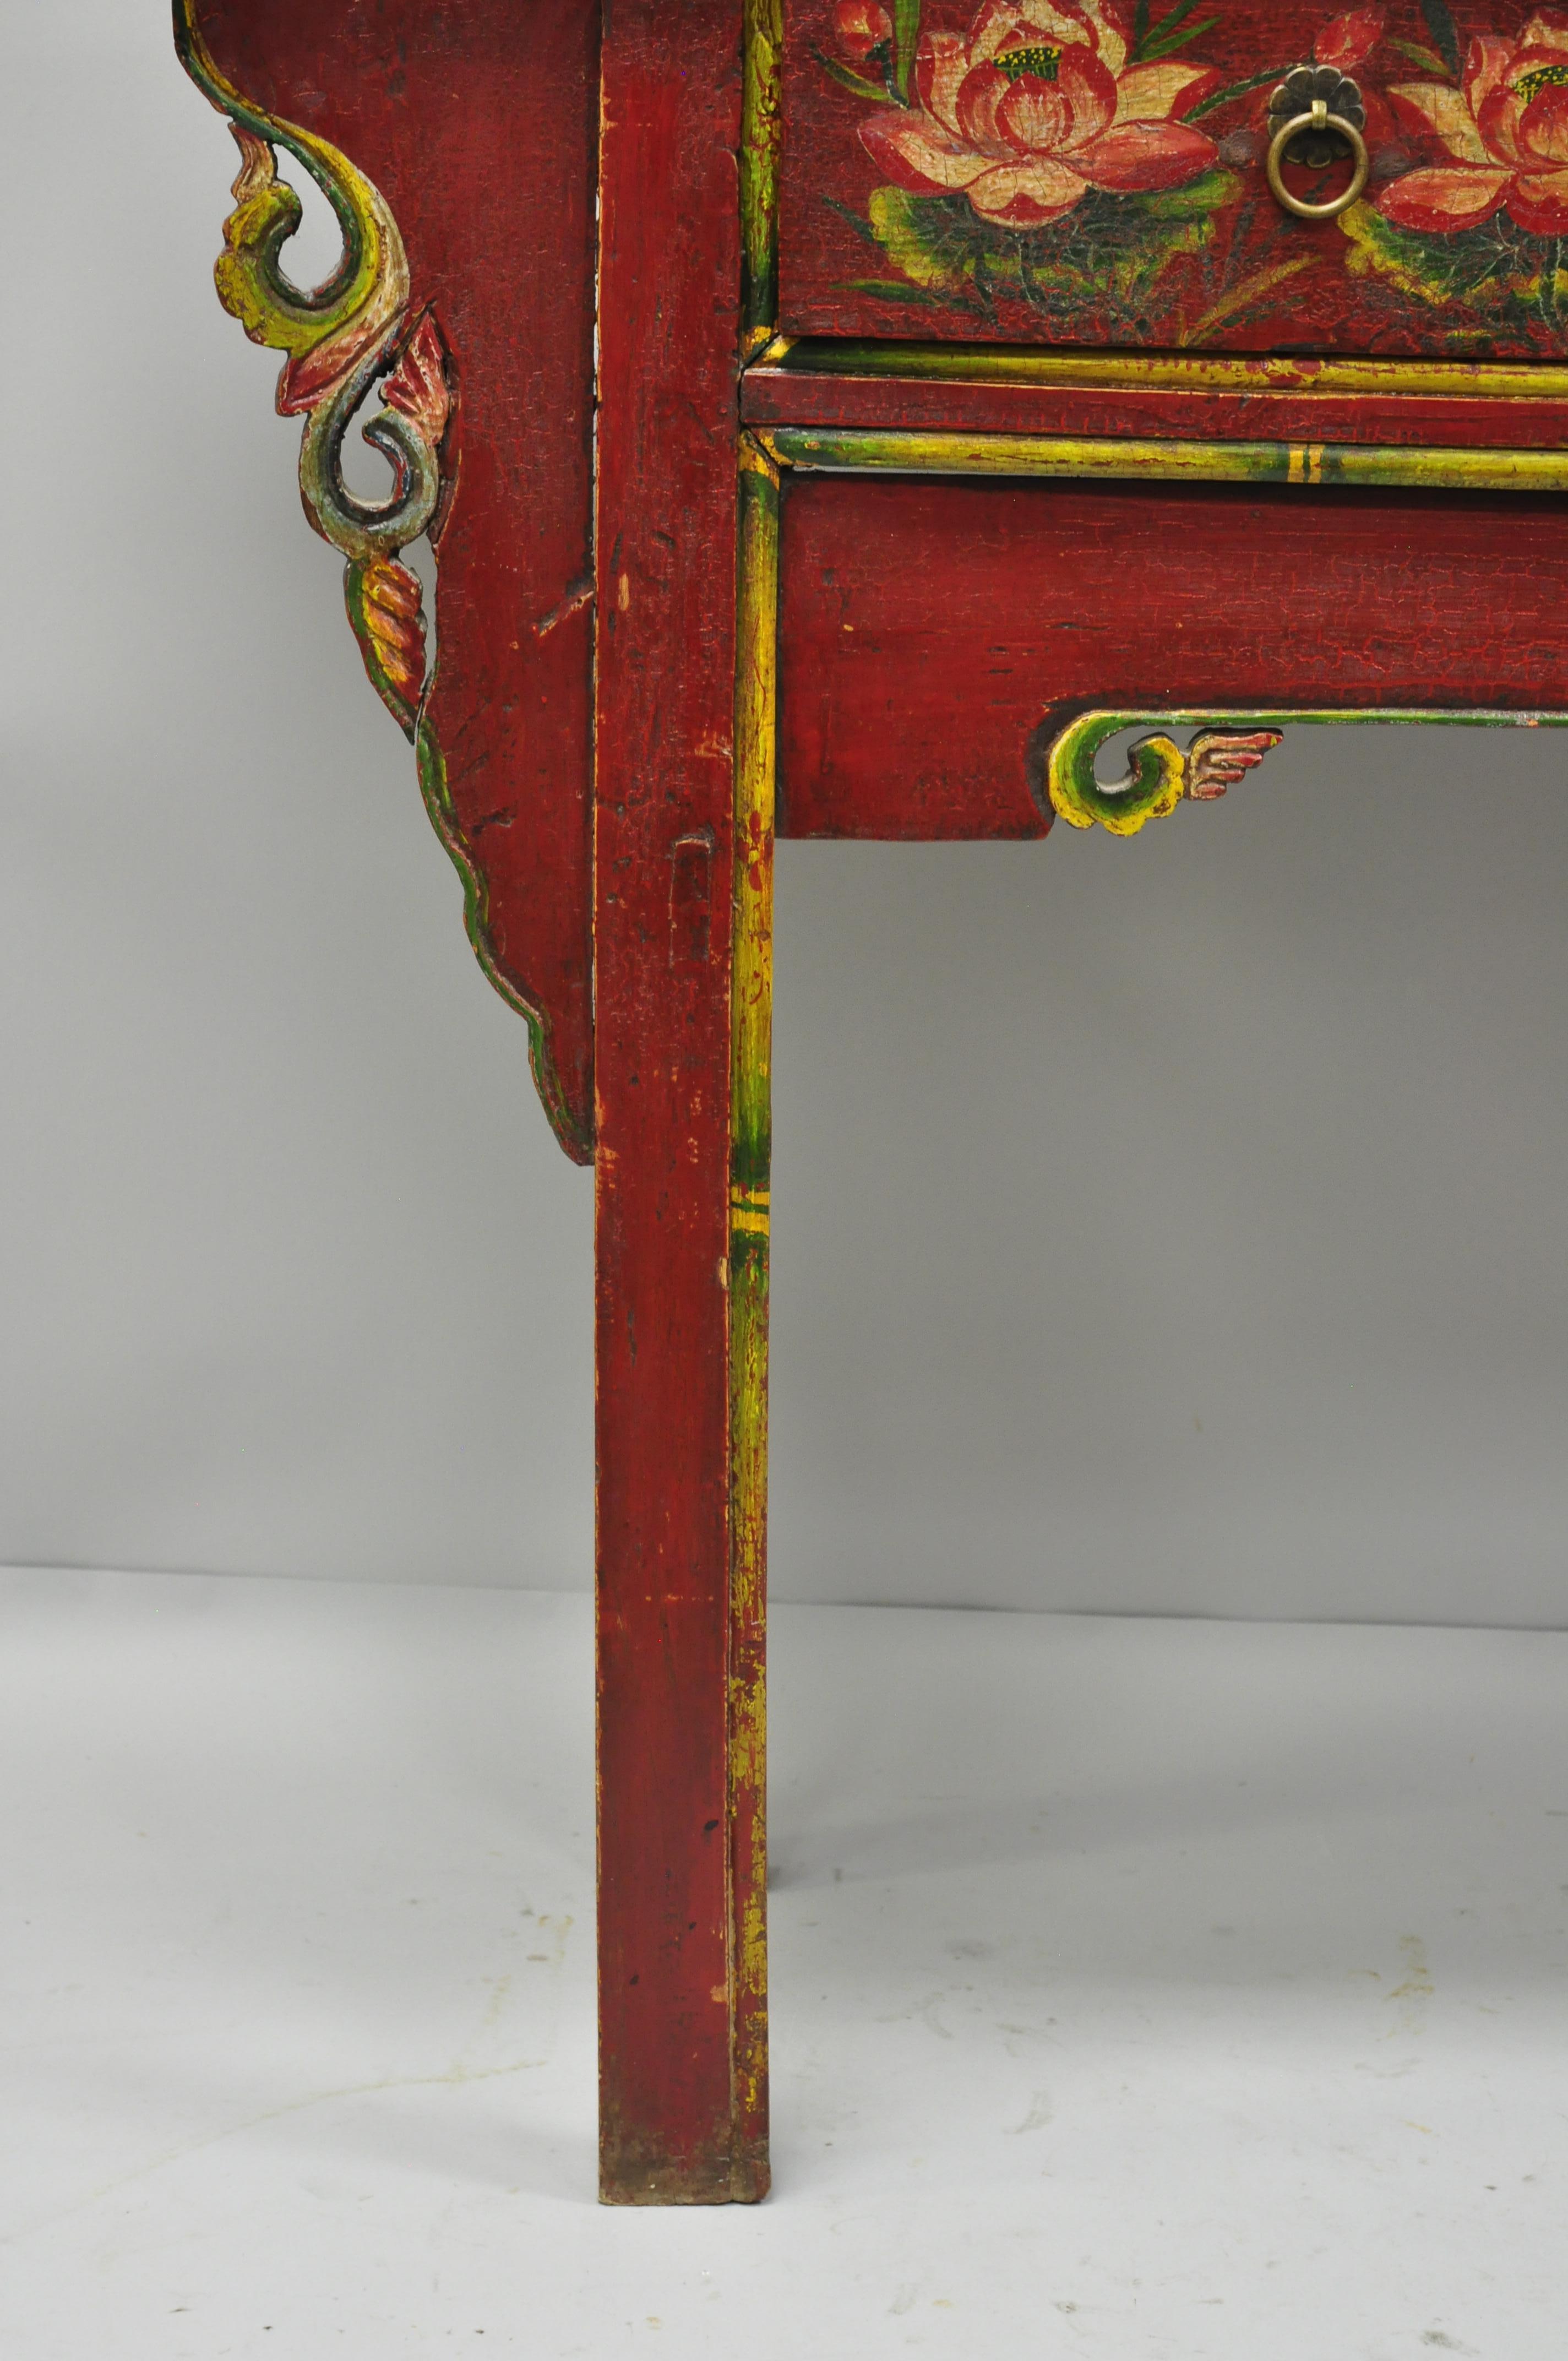 red console table